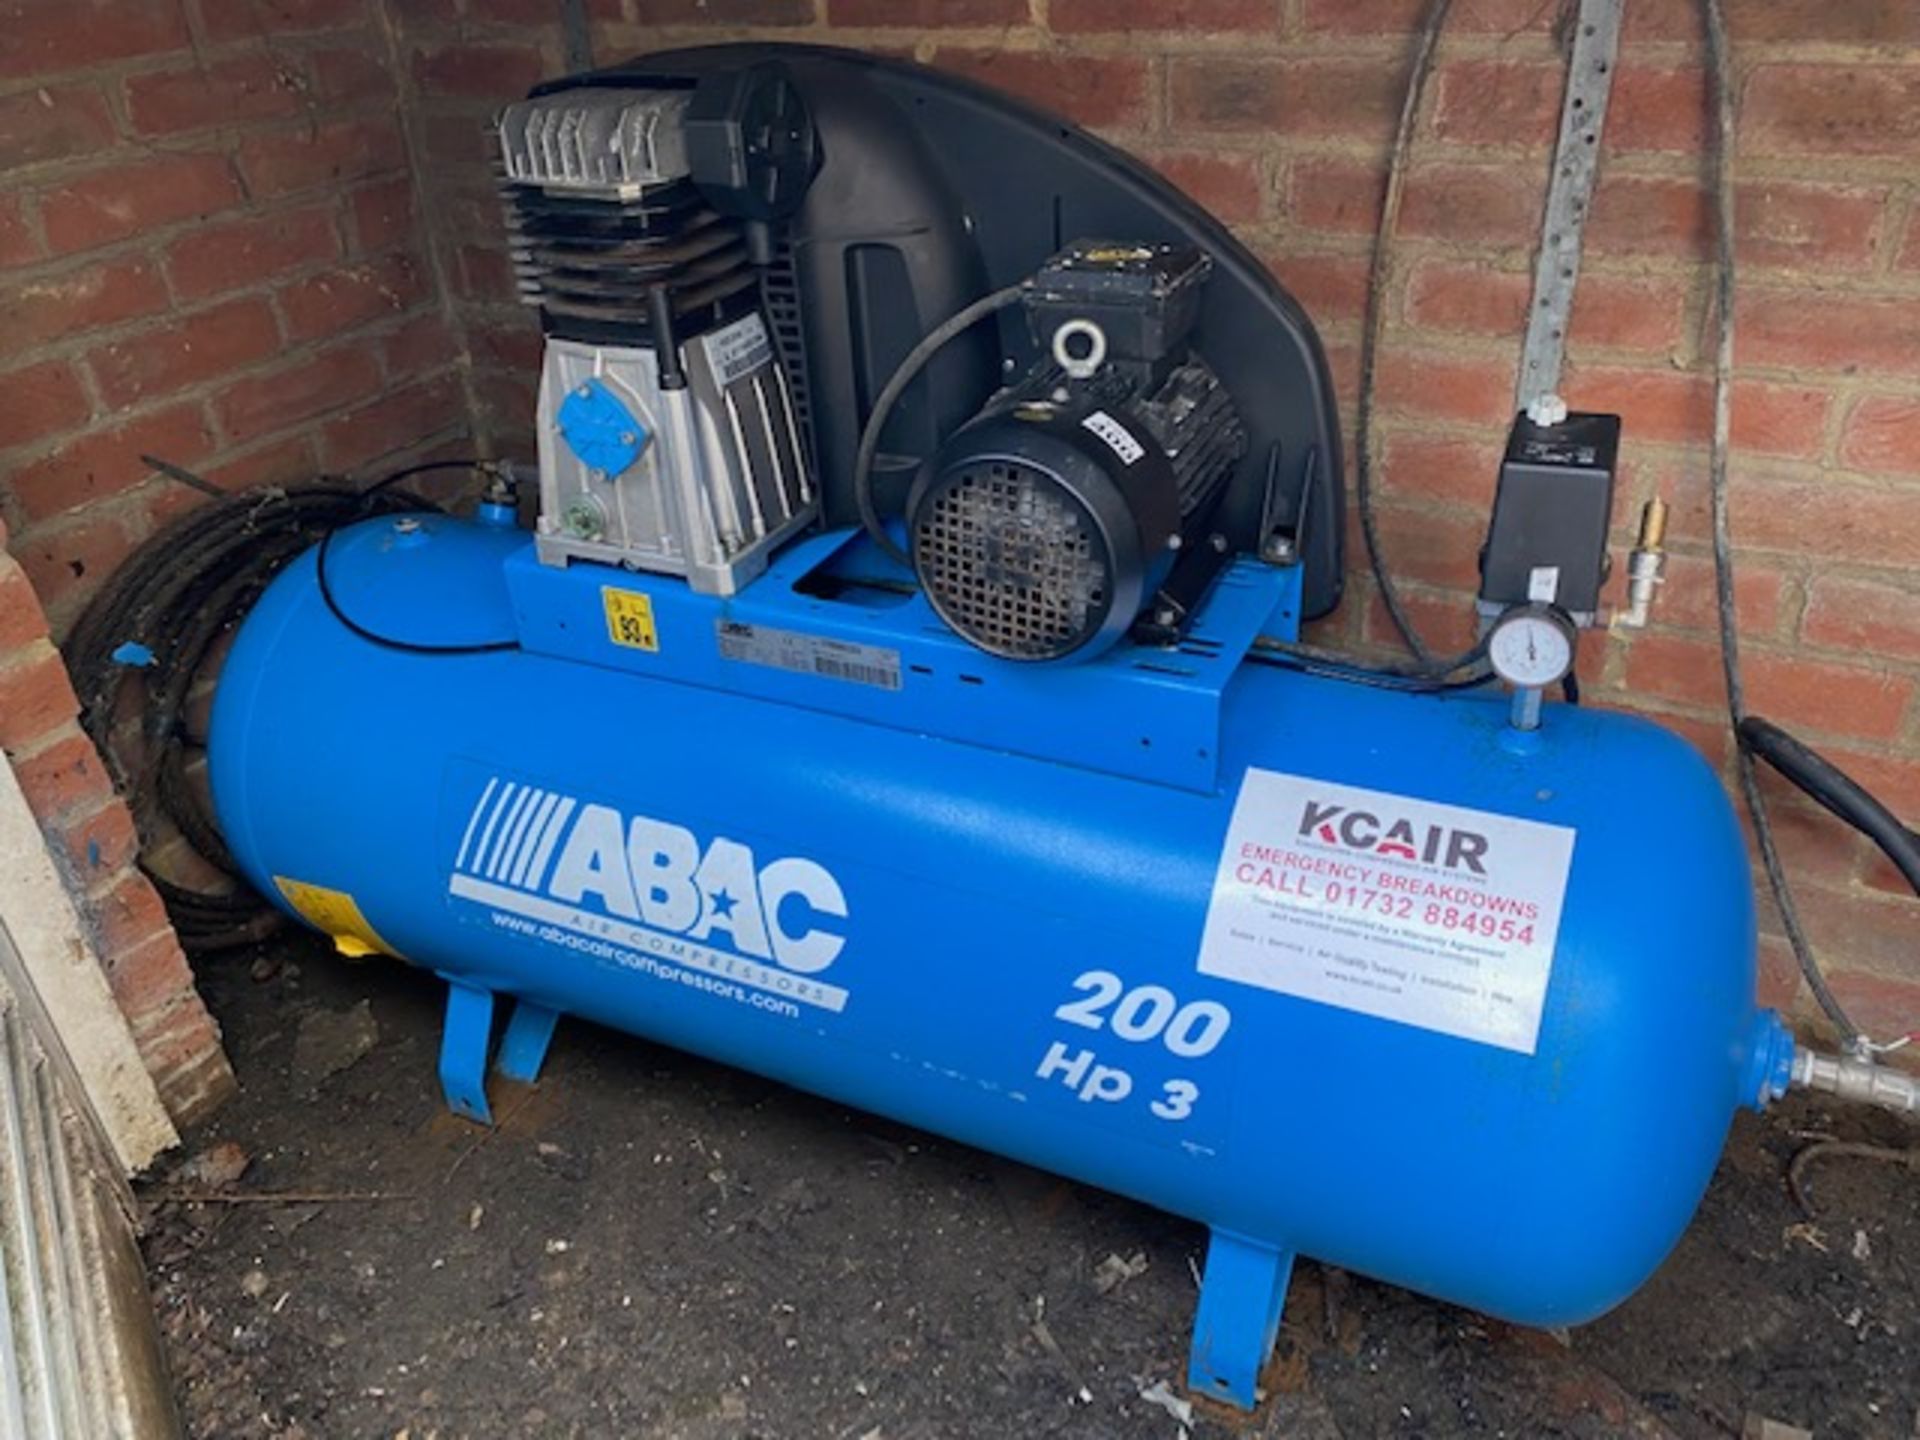 ABAC 200 HP3 air compressor c/w oil & water separator model PRO A39B 200 FT3 (2015)